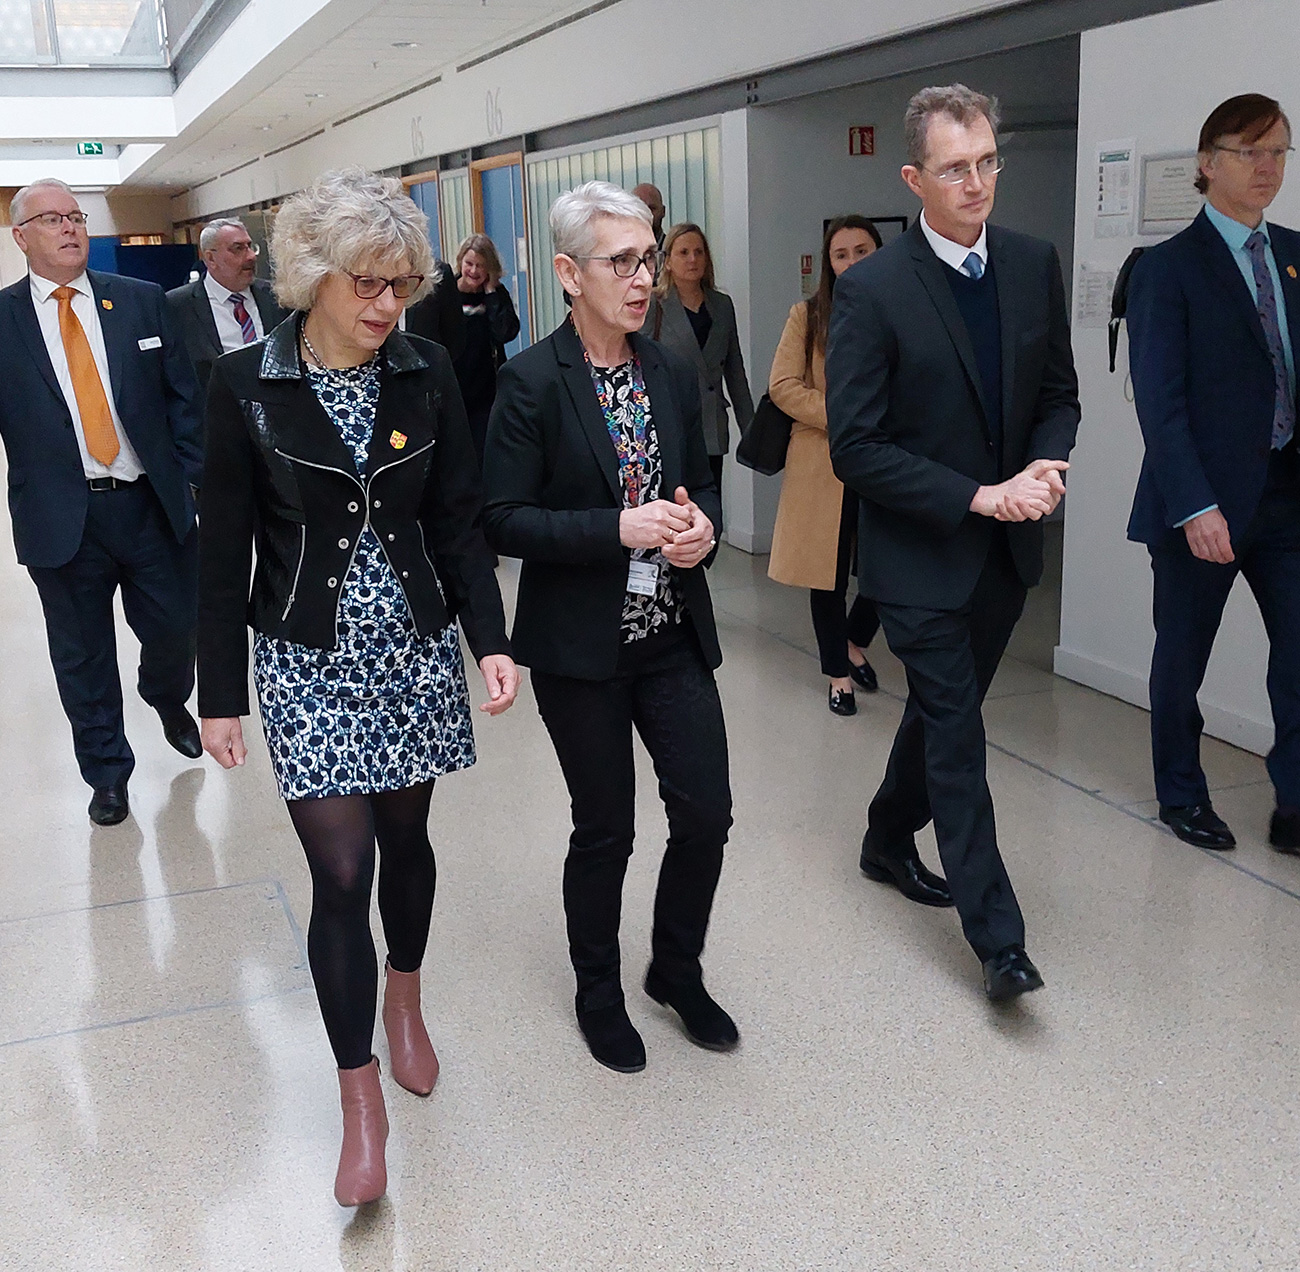 Secretary of State for Wales visit to OpTIC Centre